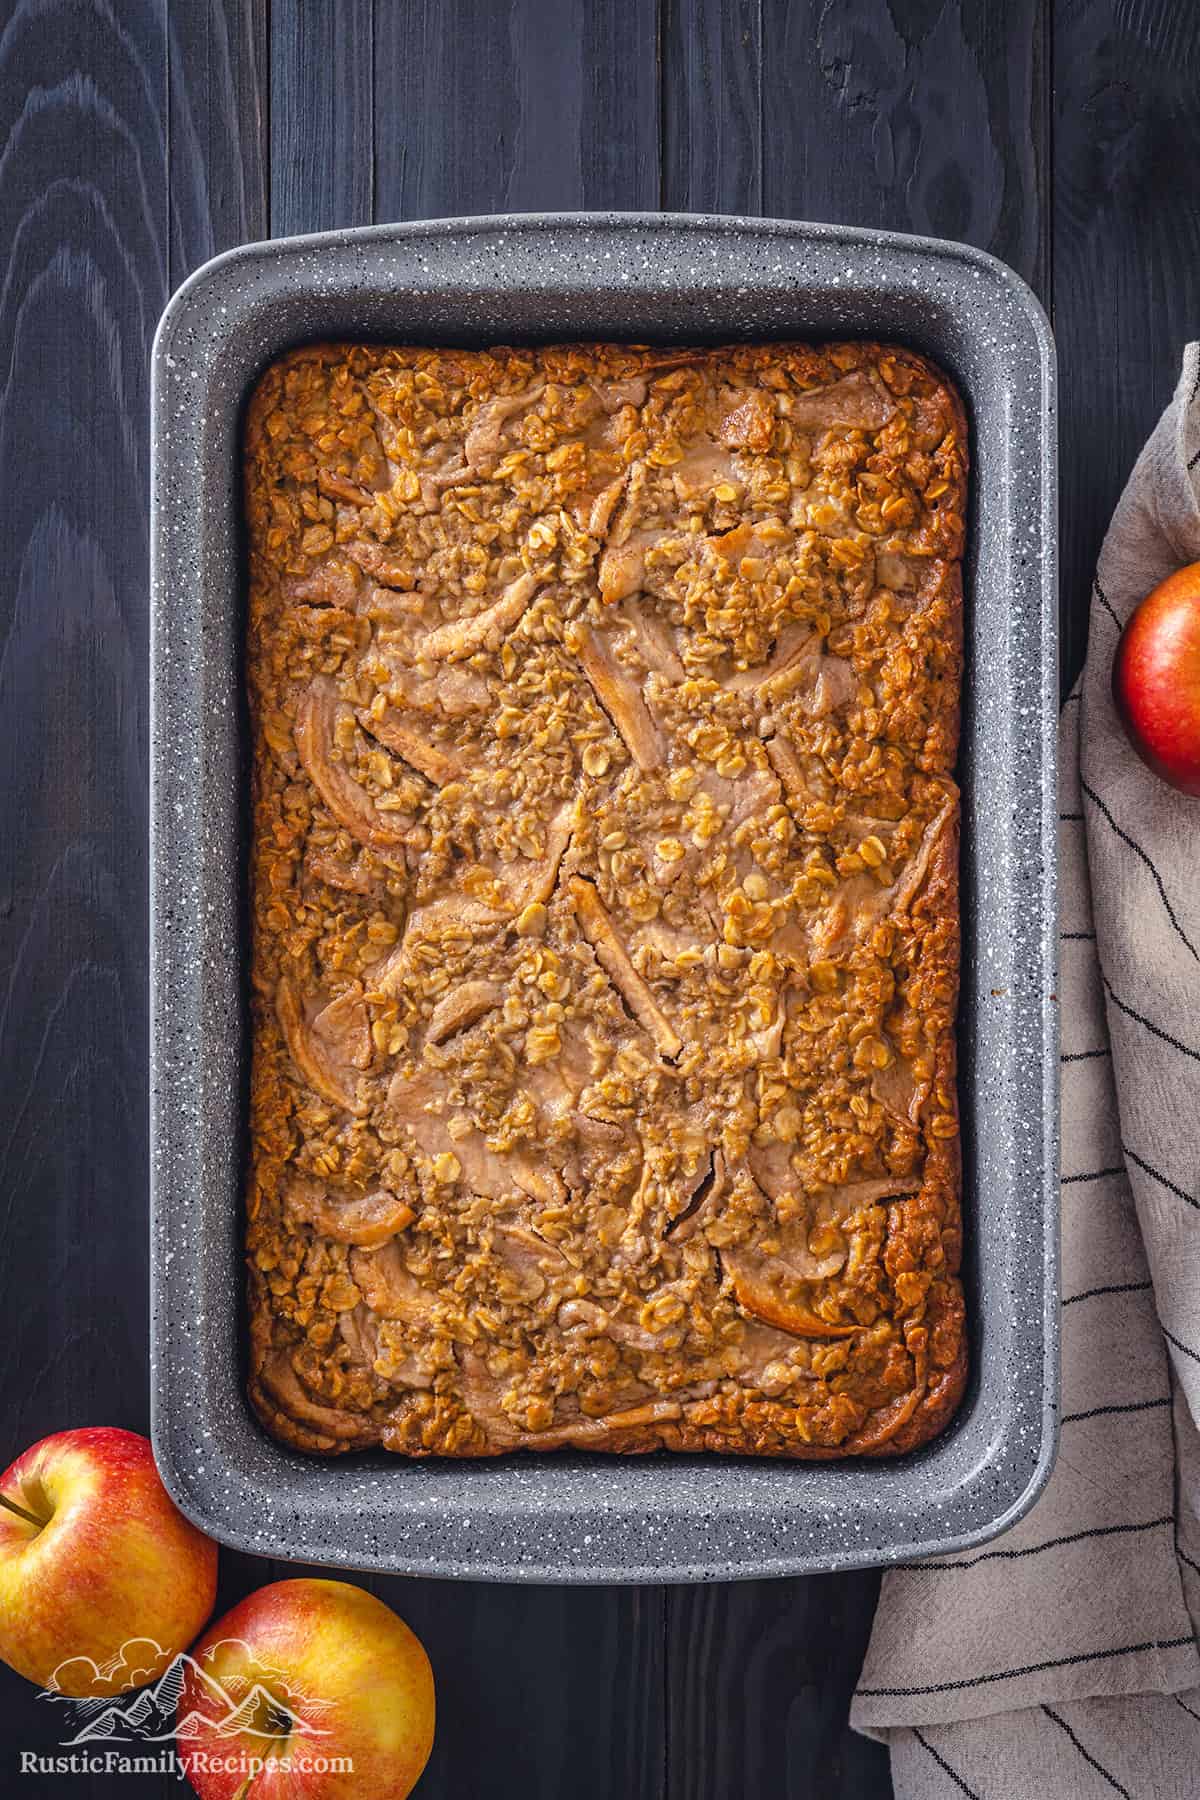 Baked apple oatmeal in a 9x13 dish